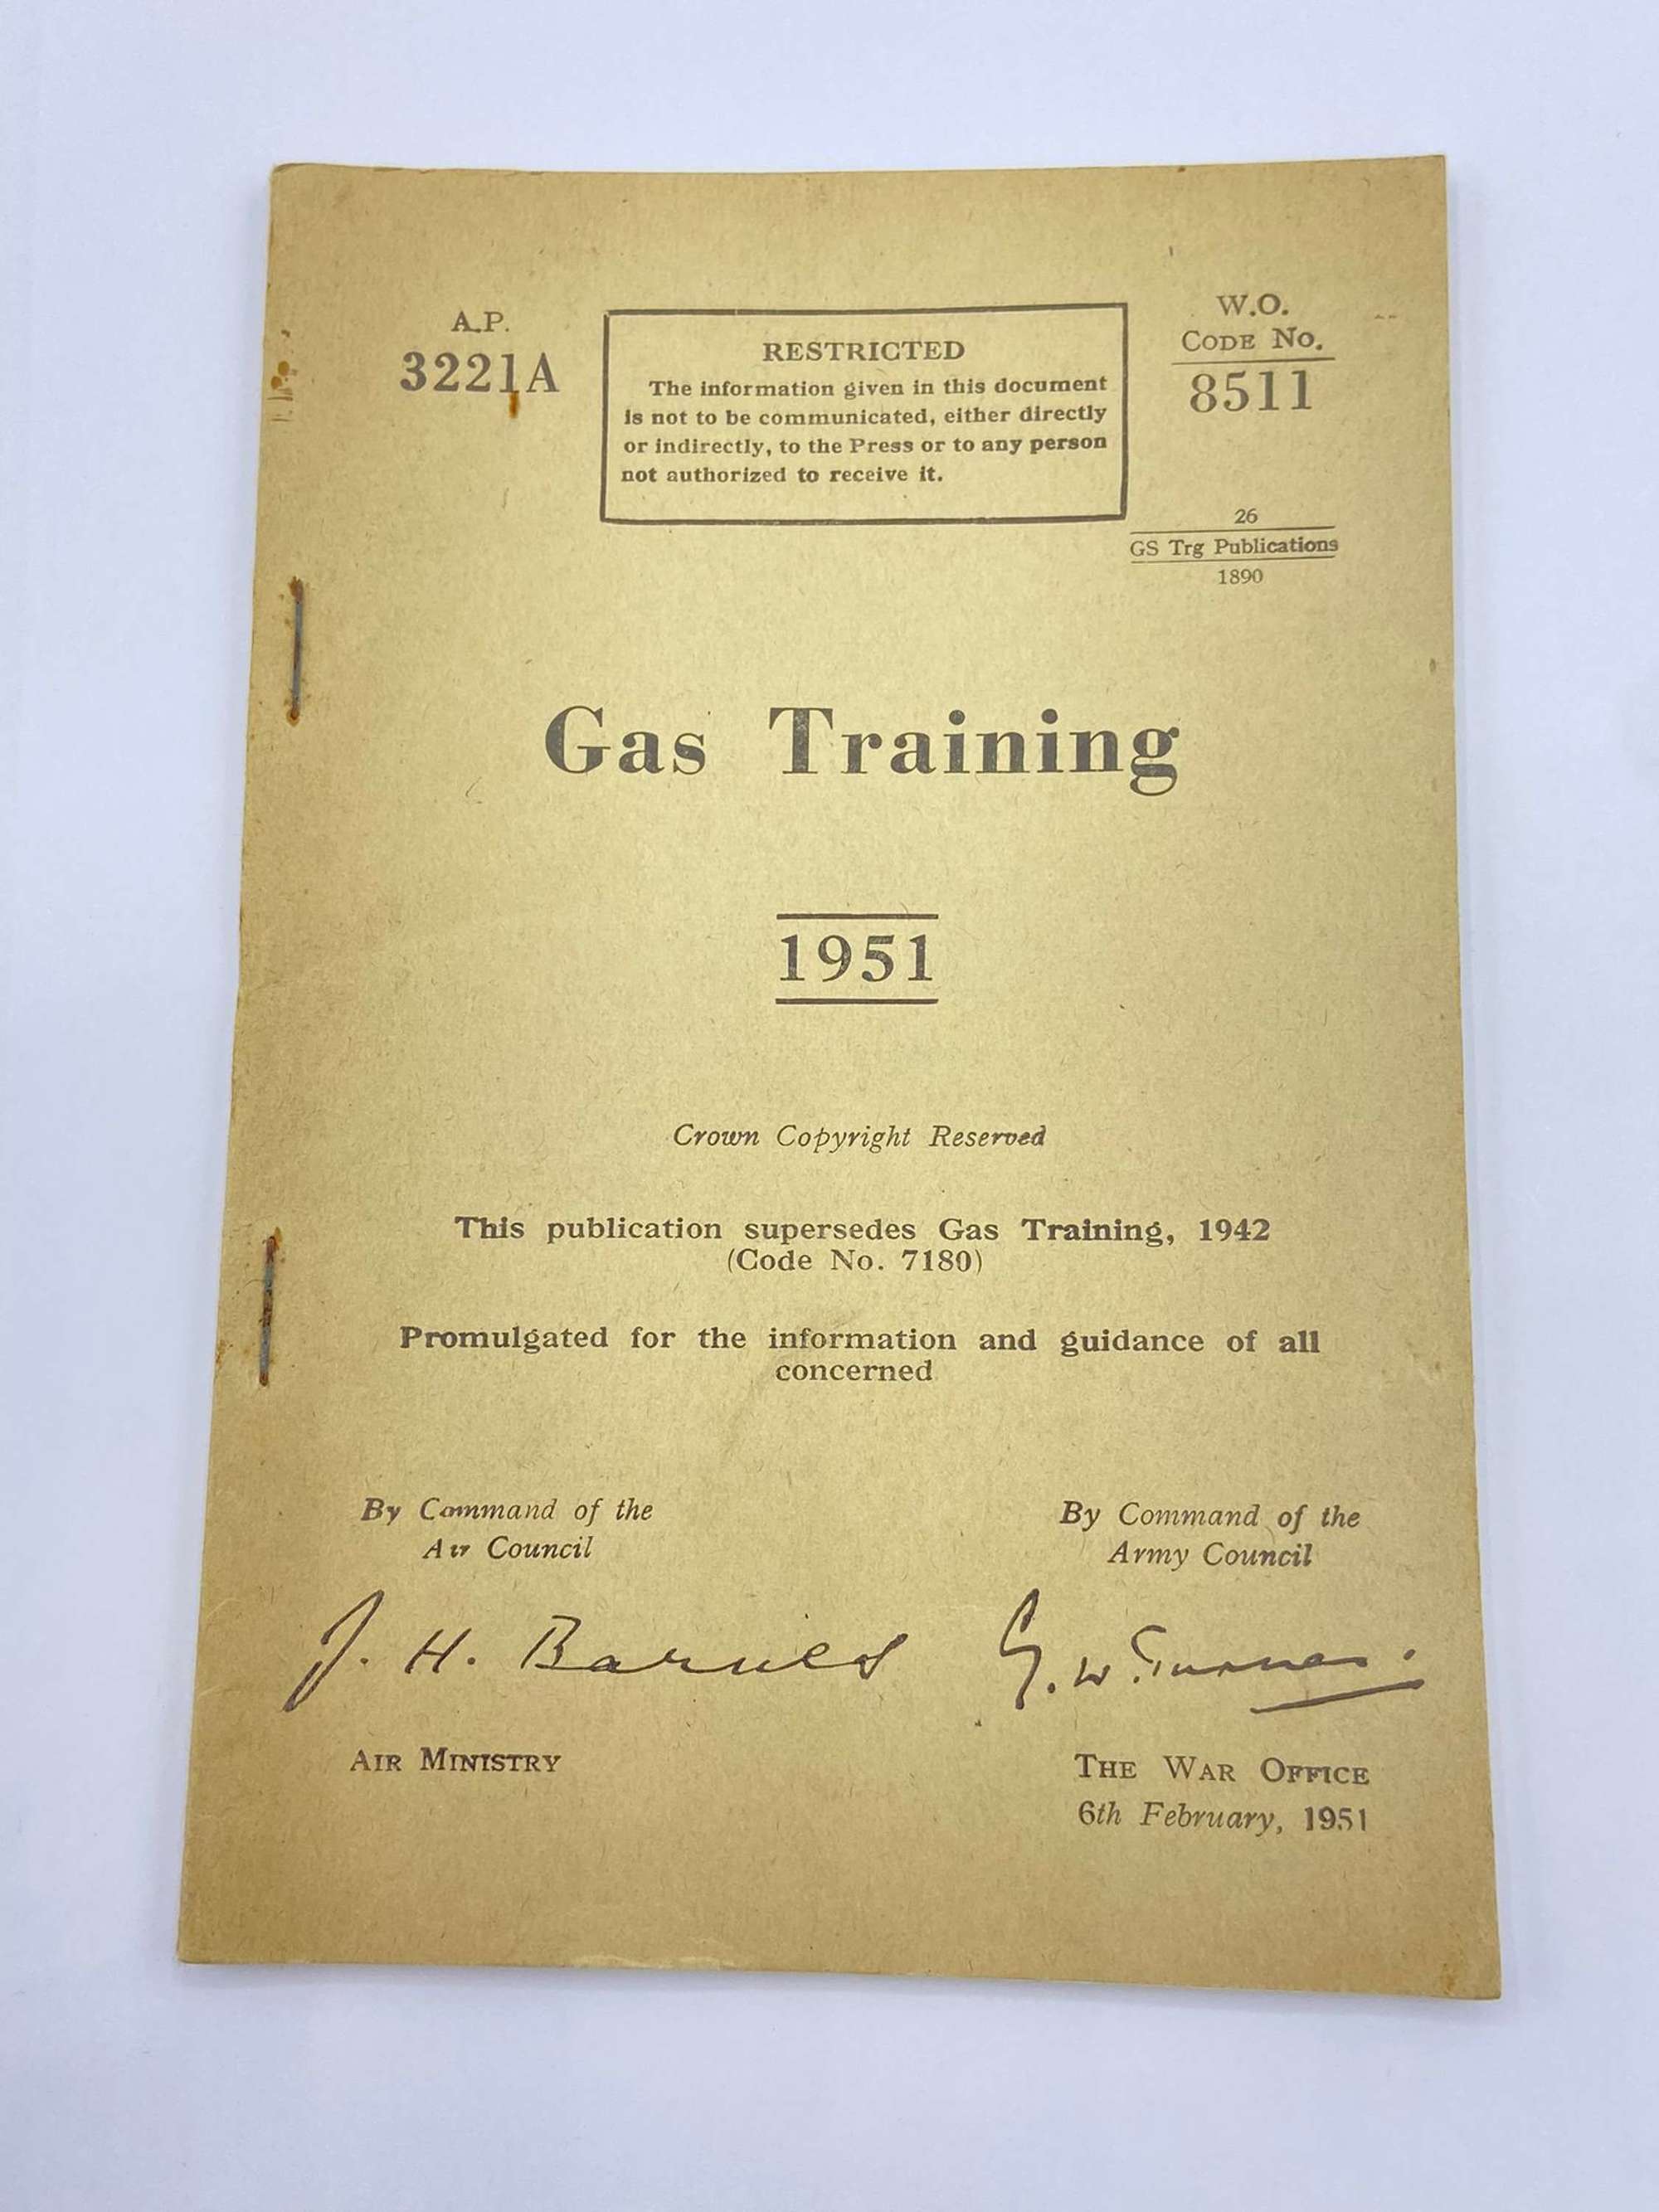 WW2 Gas Military Training Pamphlet 1951 Air Ministry & War Office